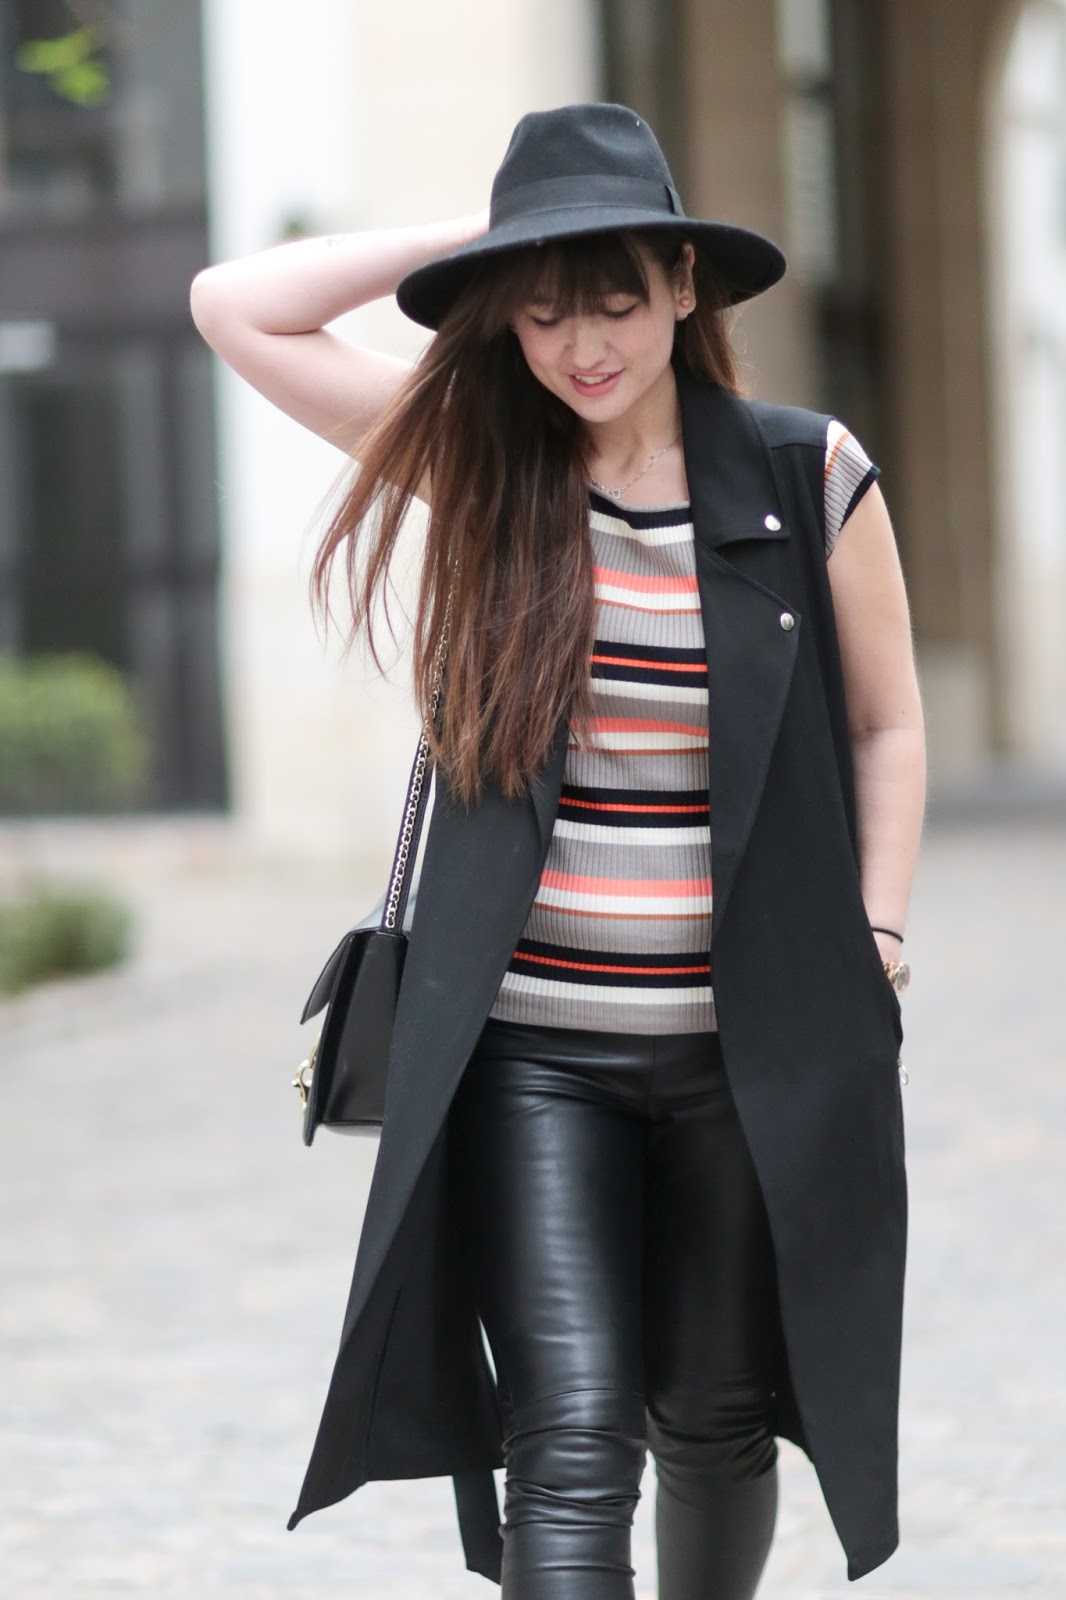 parisian fashion blogger, look, style, meetmeinparee, blogger, chic style, guess